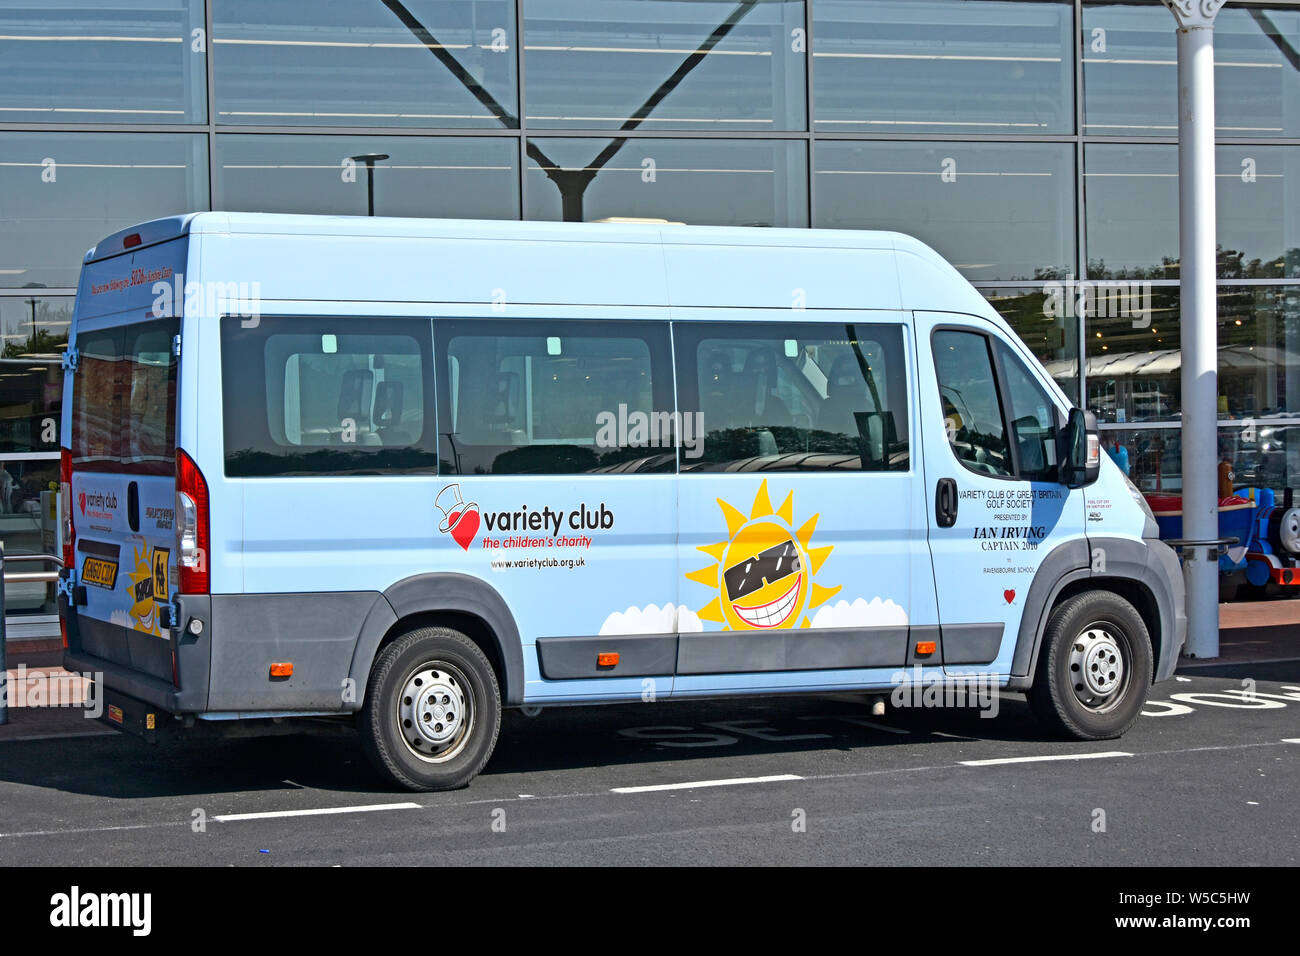 Fiat Ducato sunshine coach by The Variety Club childrens charity providing transport for charities helping disabled youngsters get about England UK Stock Photo